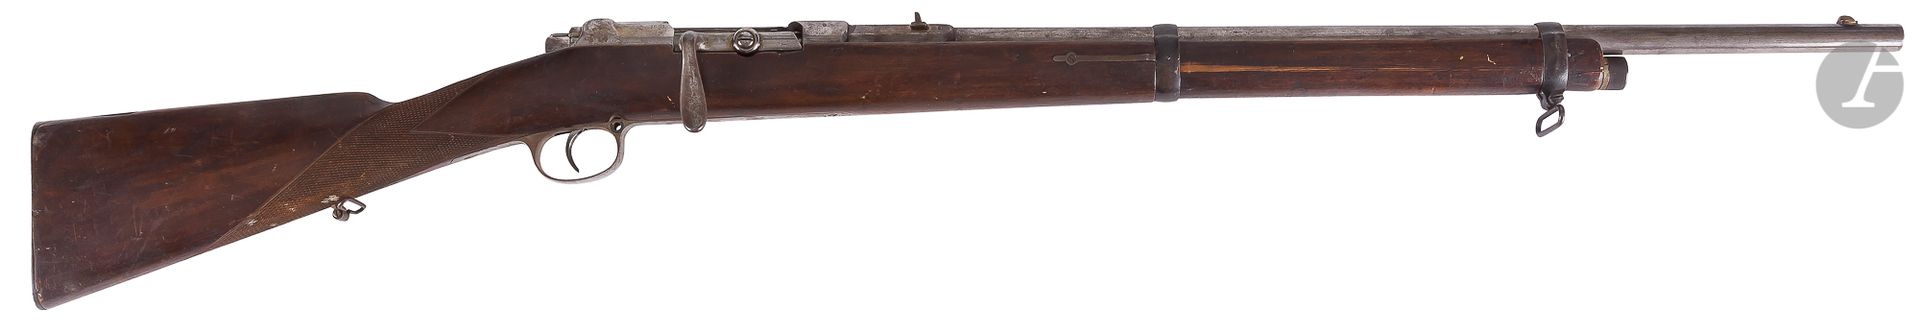 Null Mauser rifle model 1871-84 modified, calibre 11 mm, with bent bolt and tubu&hellip;